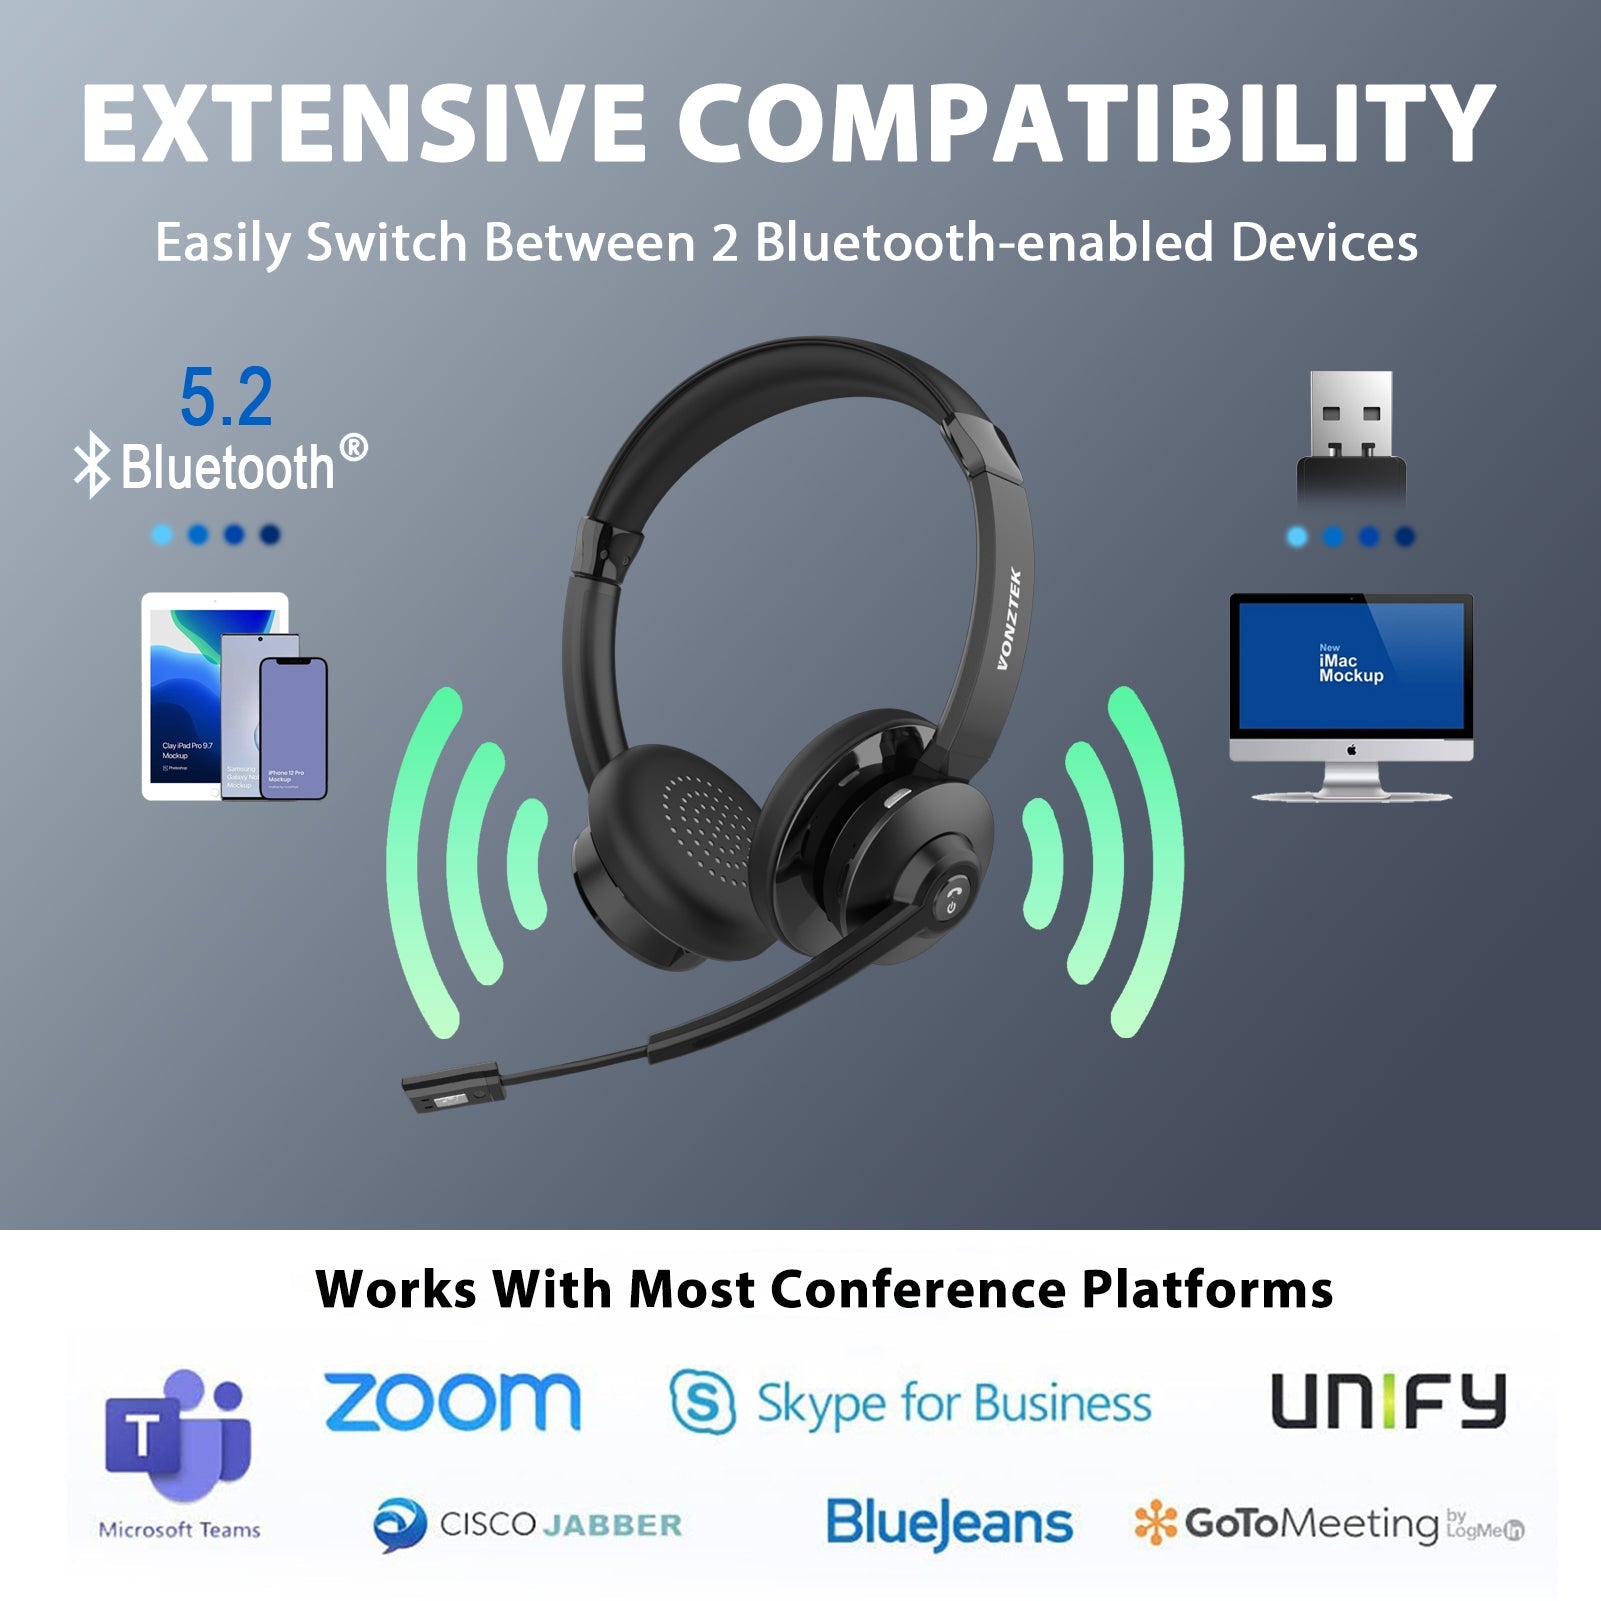 Extensive compatibility,Works with most conference platforms,Microsoft teams,zoom,cisco jabber,skype for business,bluejeans,unify,gotomeeting